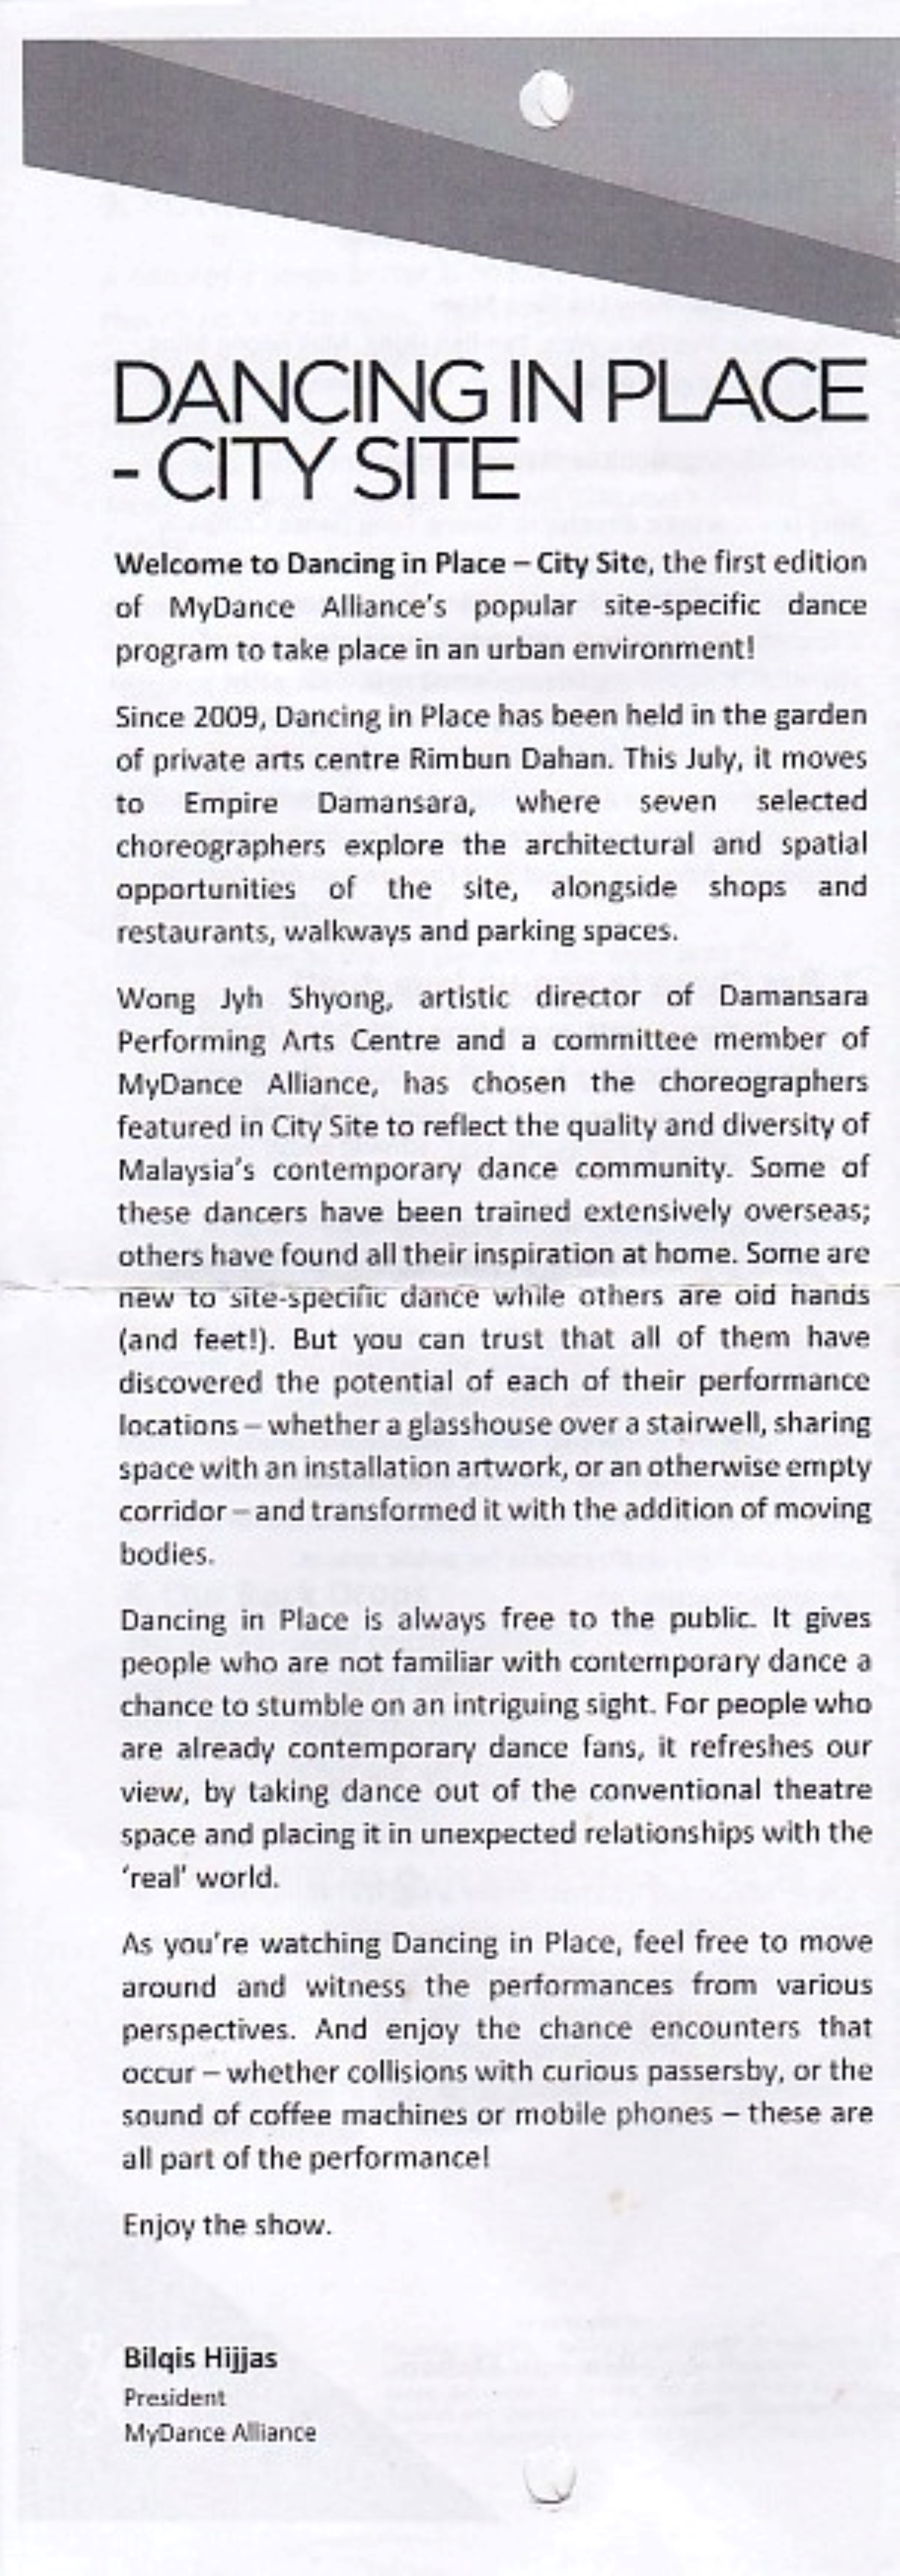 2016 Dancing In Place - City Site President message